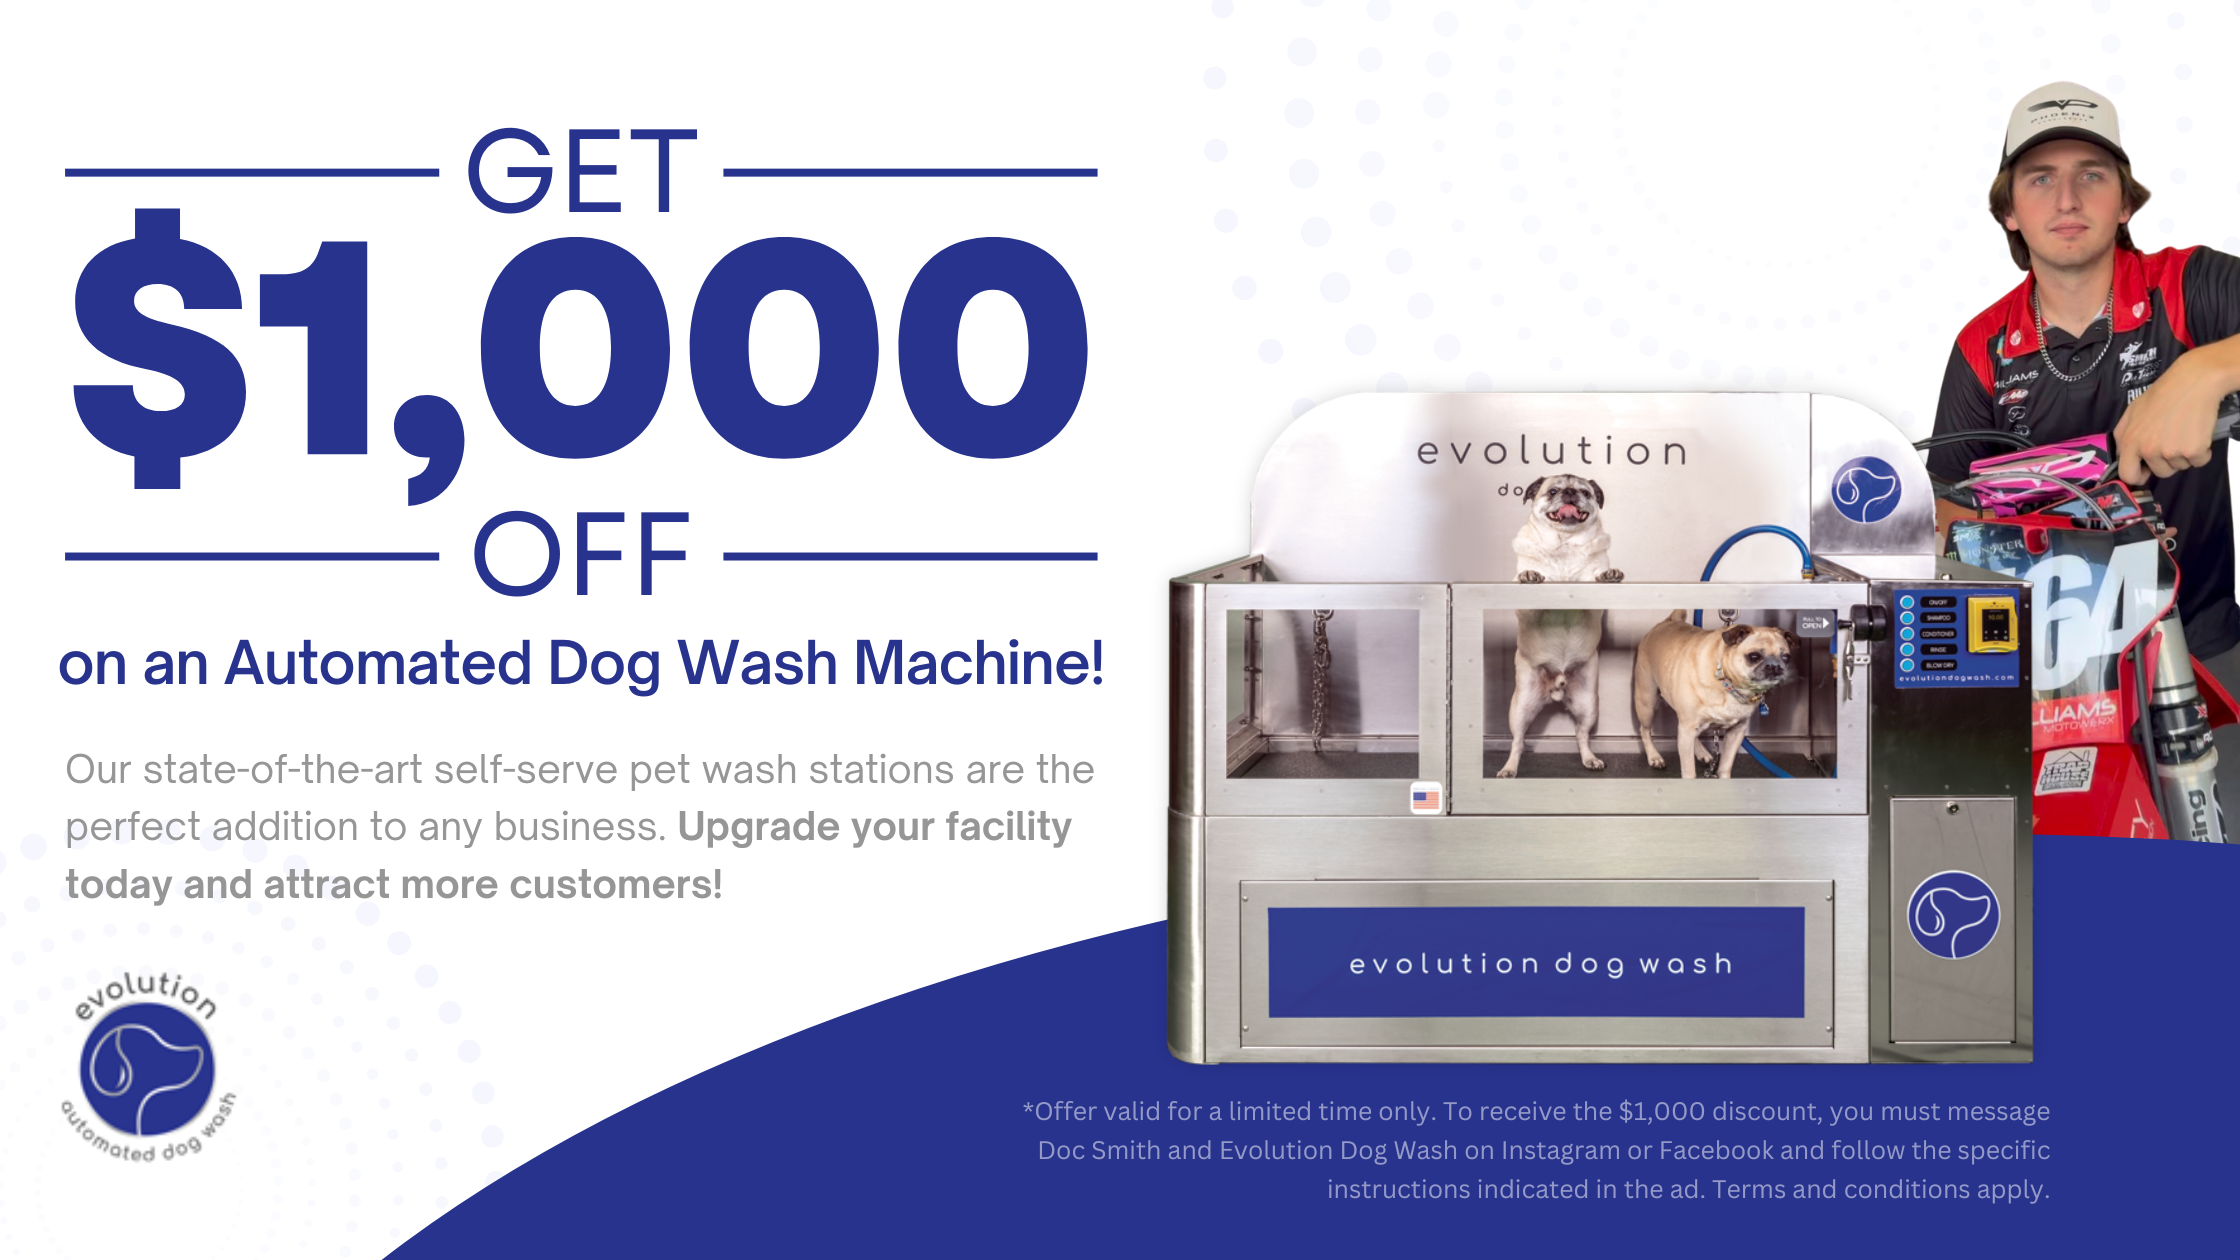 $1,000 off Evolution Dog Wash Machine with two dogs and a person